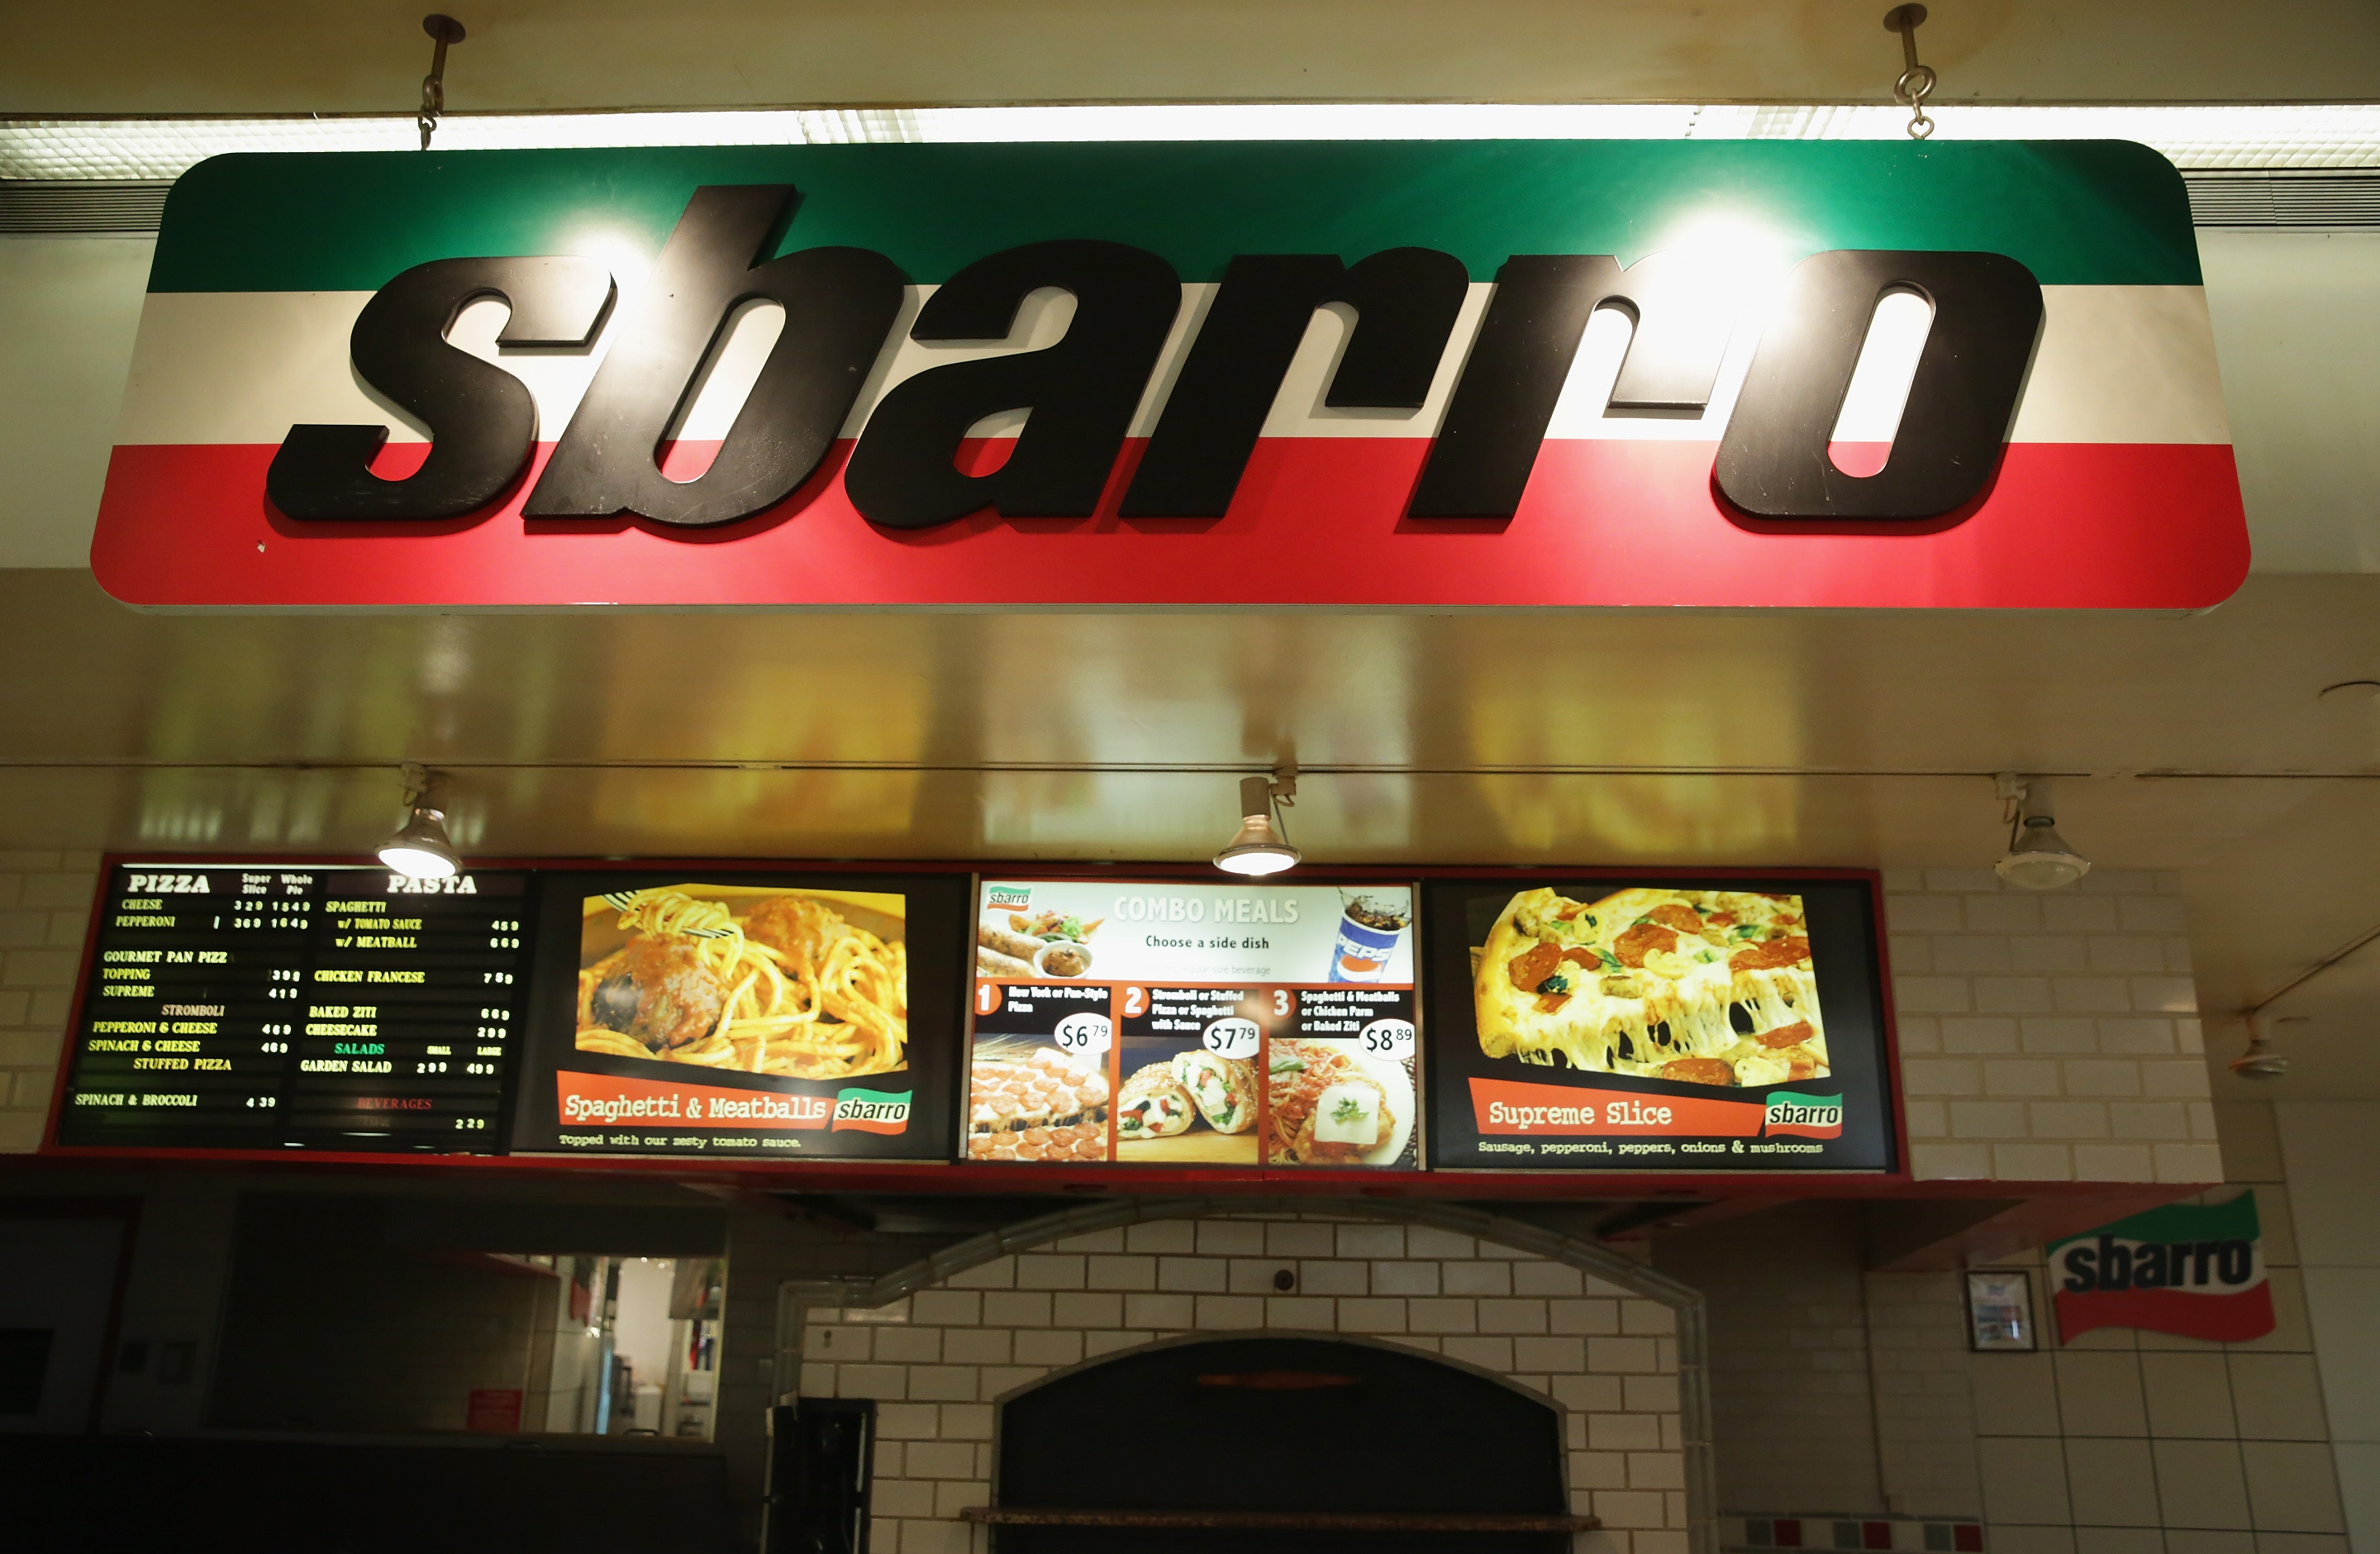 Is There Life After the Mall for Sbarro? - Eater